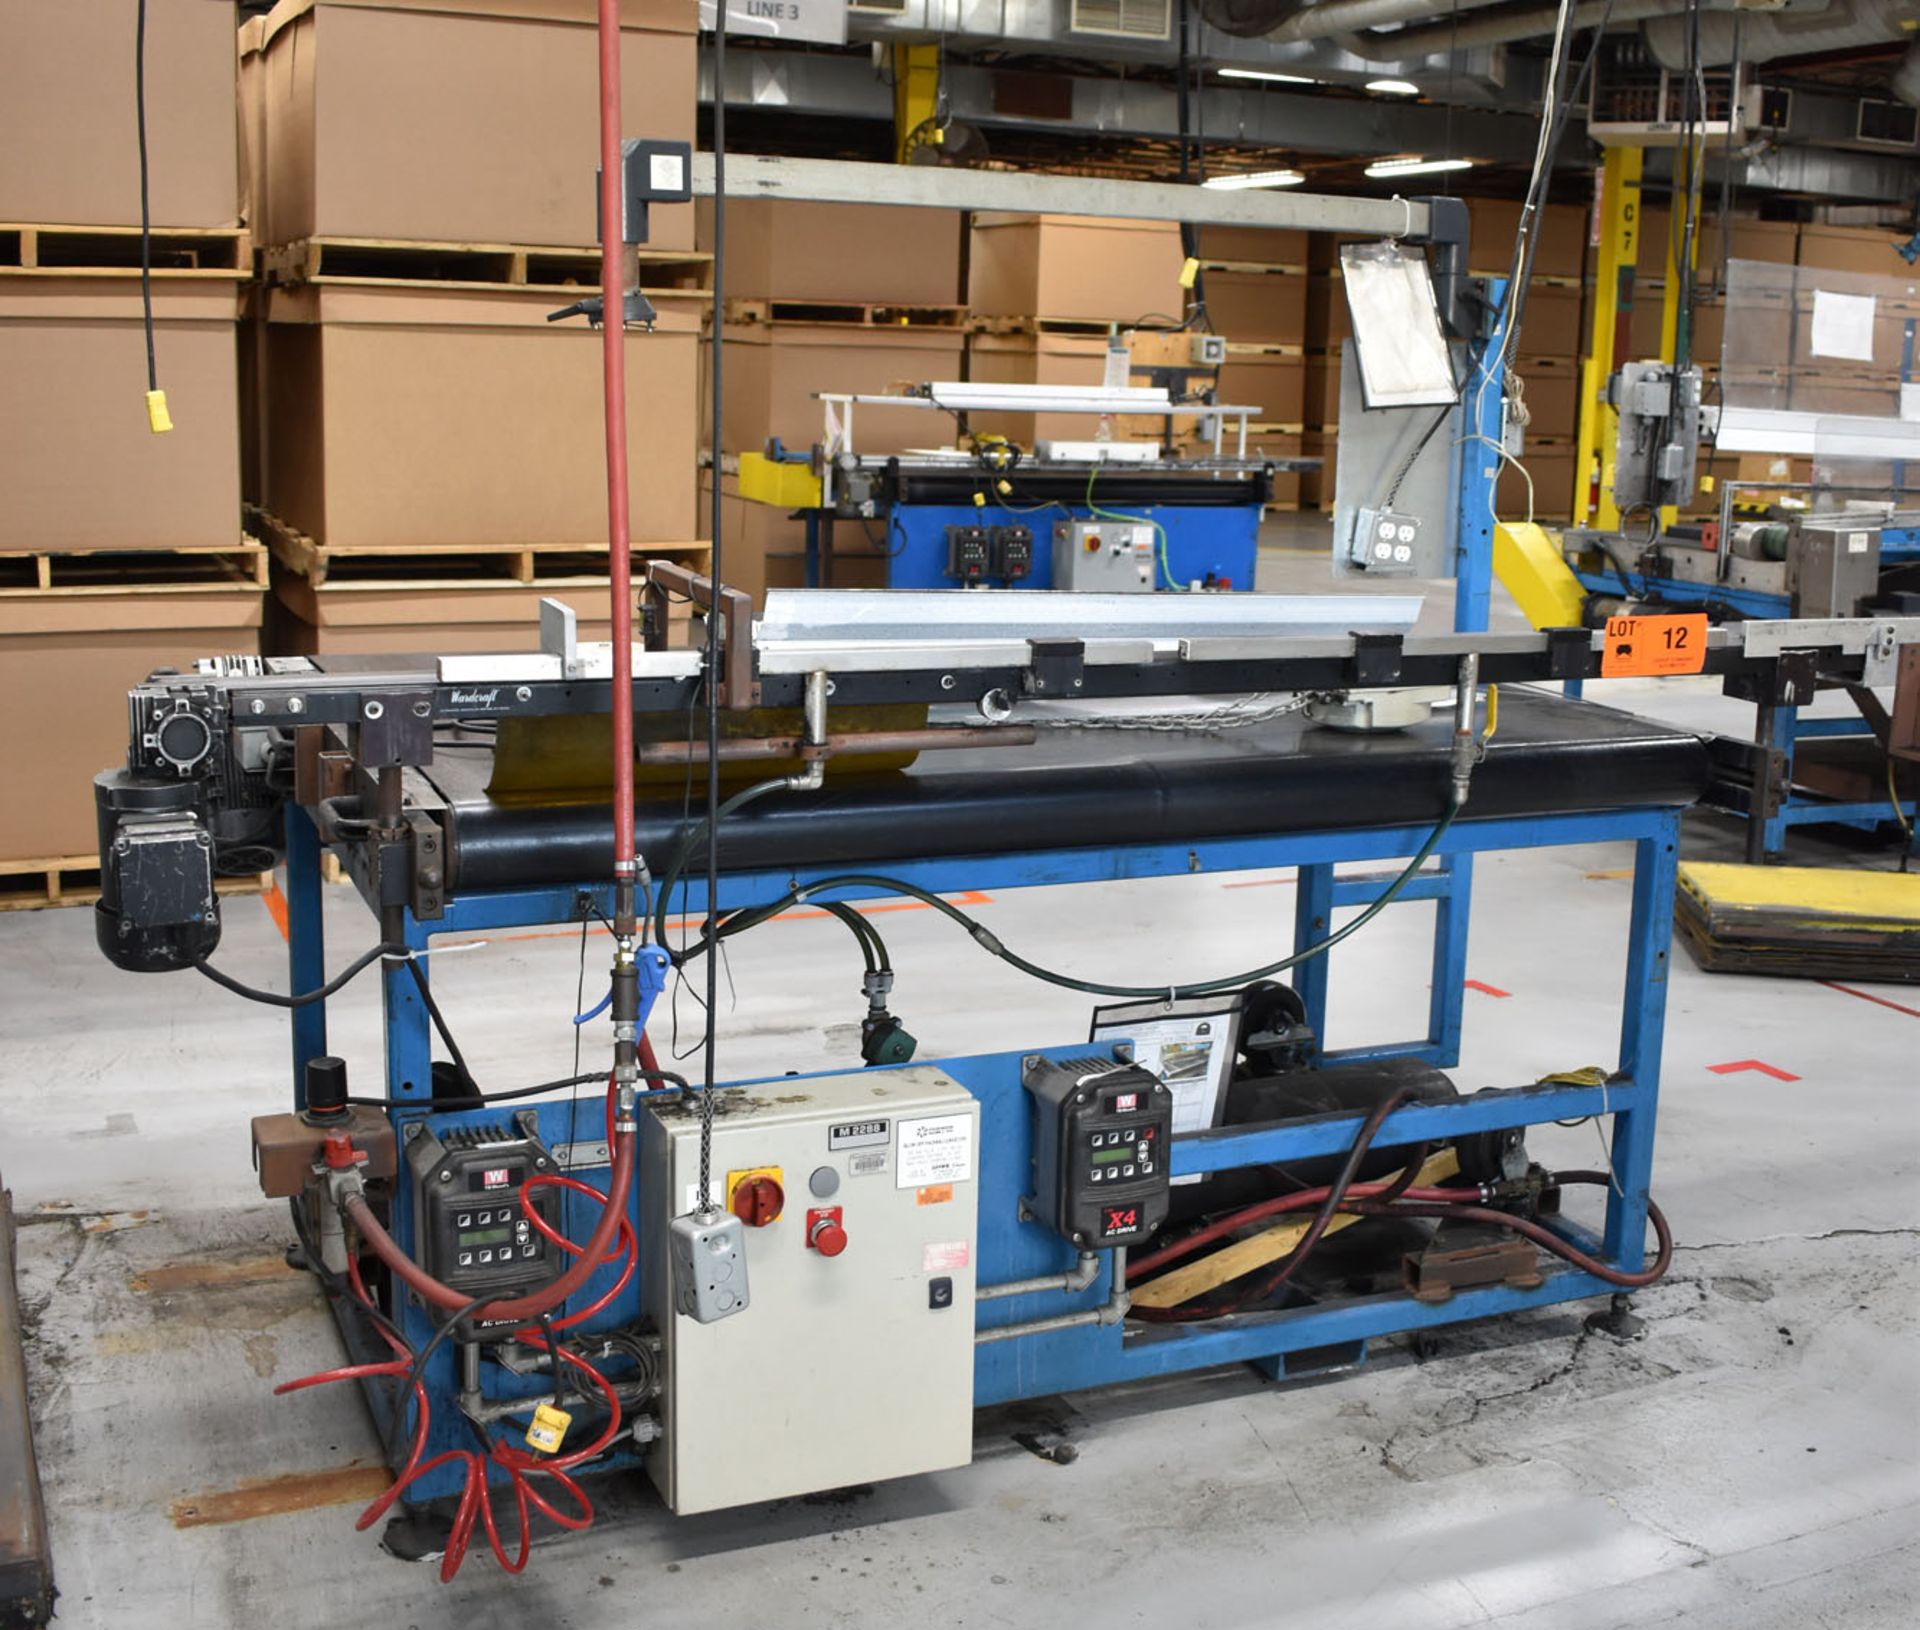 MFG UNKNOWN UNLOADING/DOFFING STATION WITH 71"X52" POWERED RUBBER BELT CONVEYOR, WORKING ARM WITH